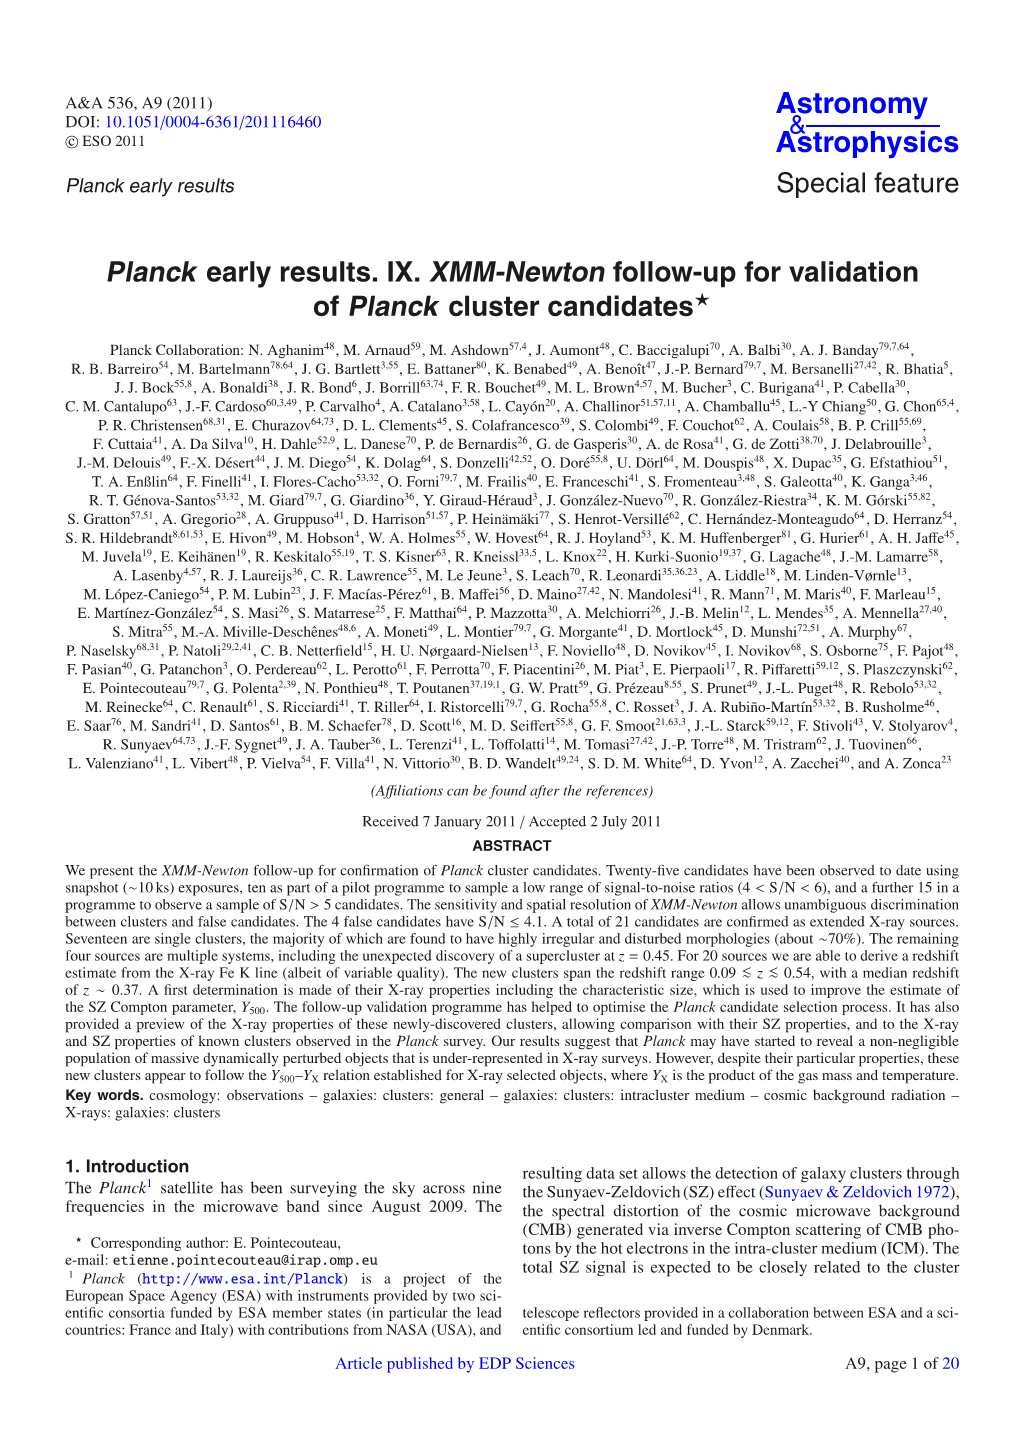 Planck Early Results. IX. XMM-Newton Follow-Up for Validation of Planck Cluster Candidates⋆